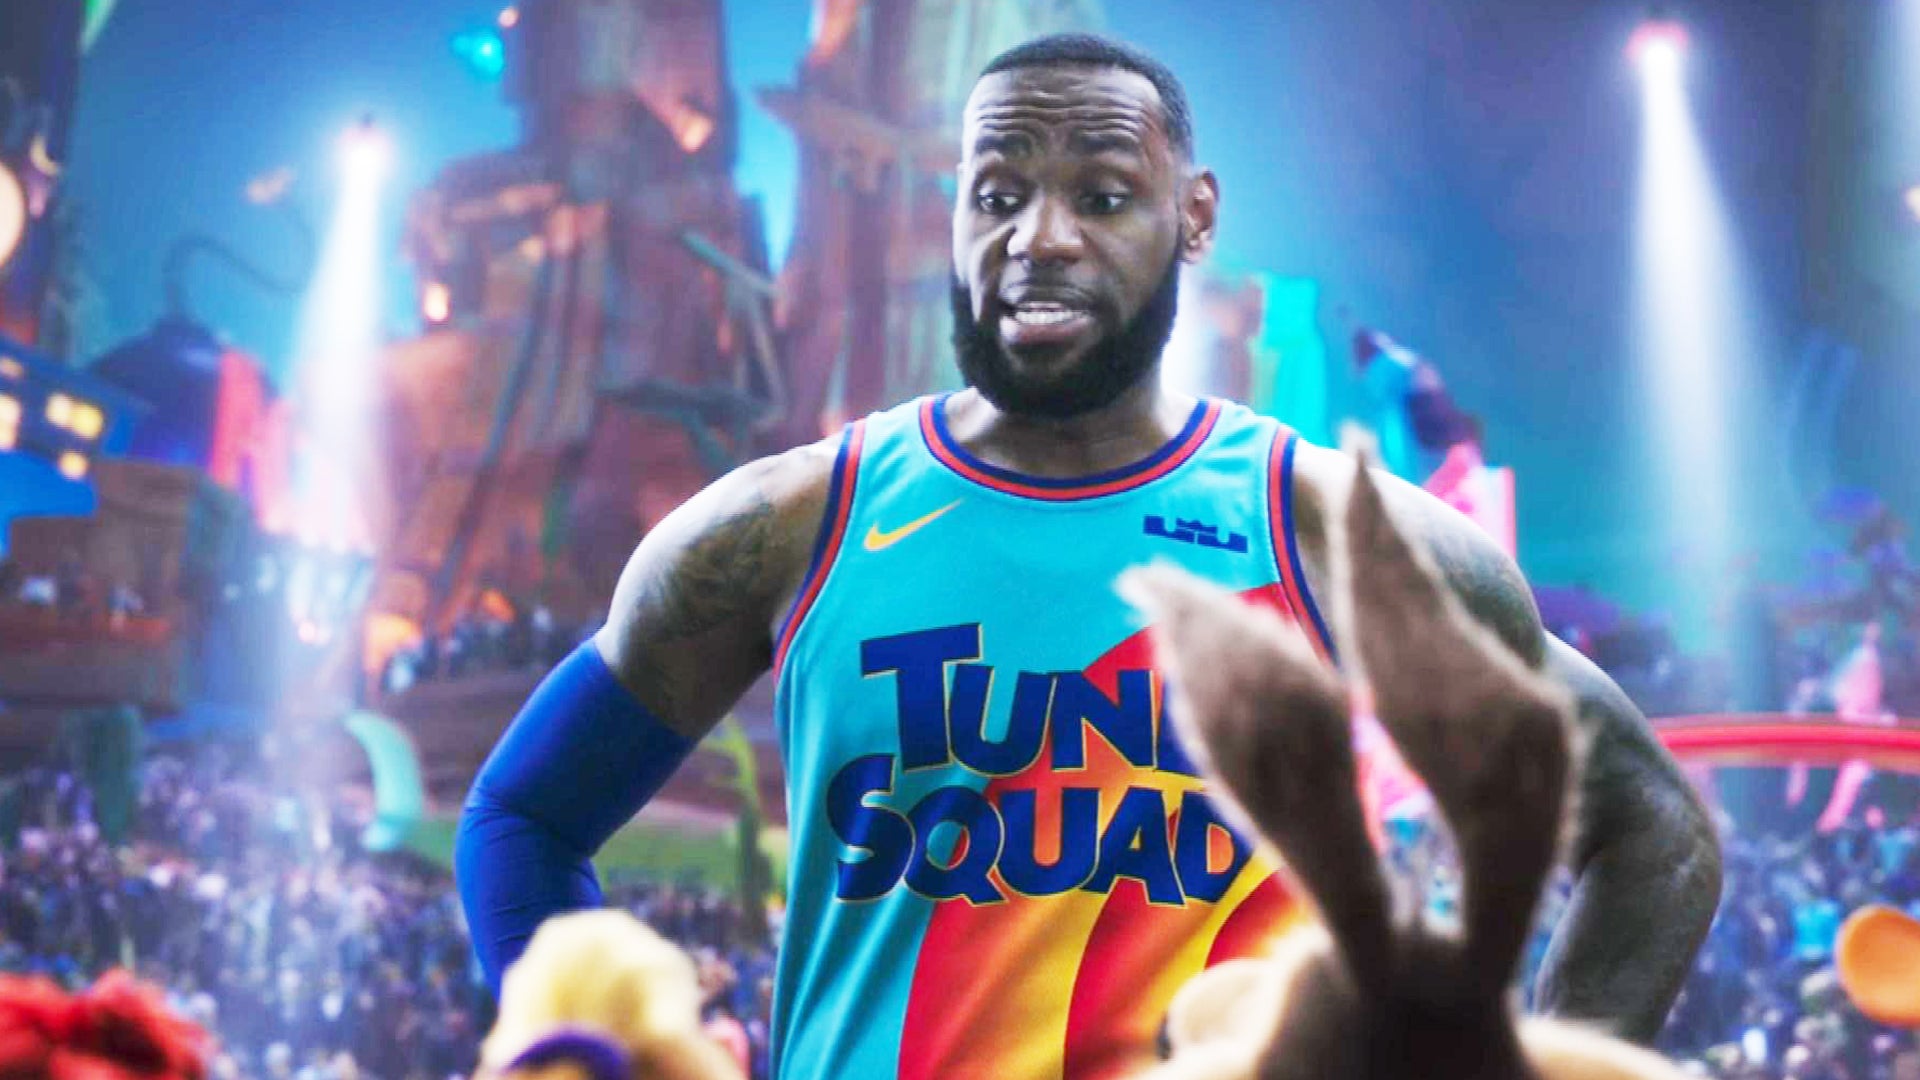 Space Jam: A New Legacy Trailer: LeBron James and Looney Tunes Team Up